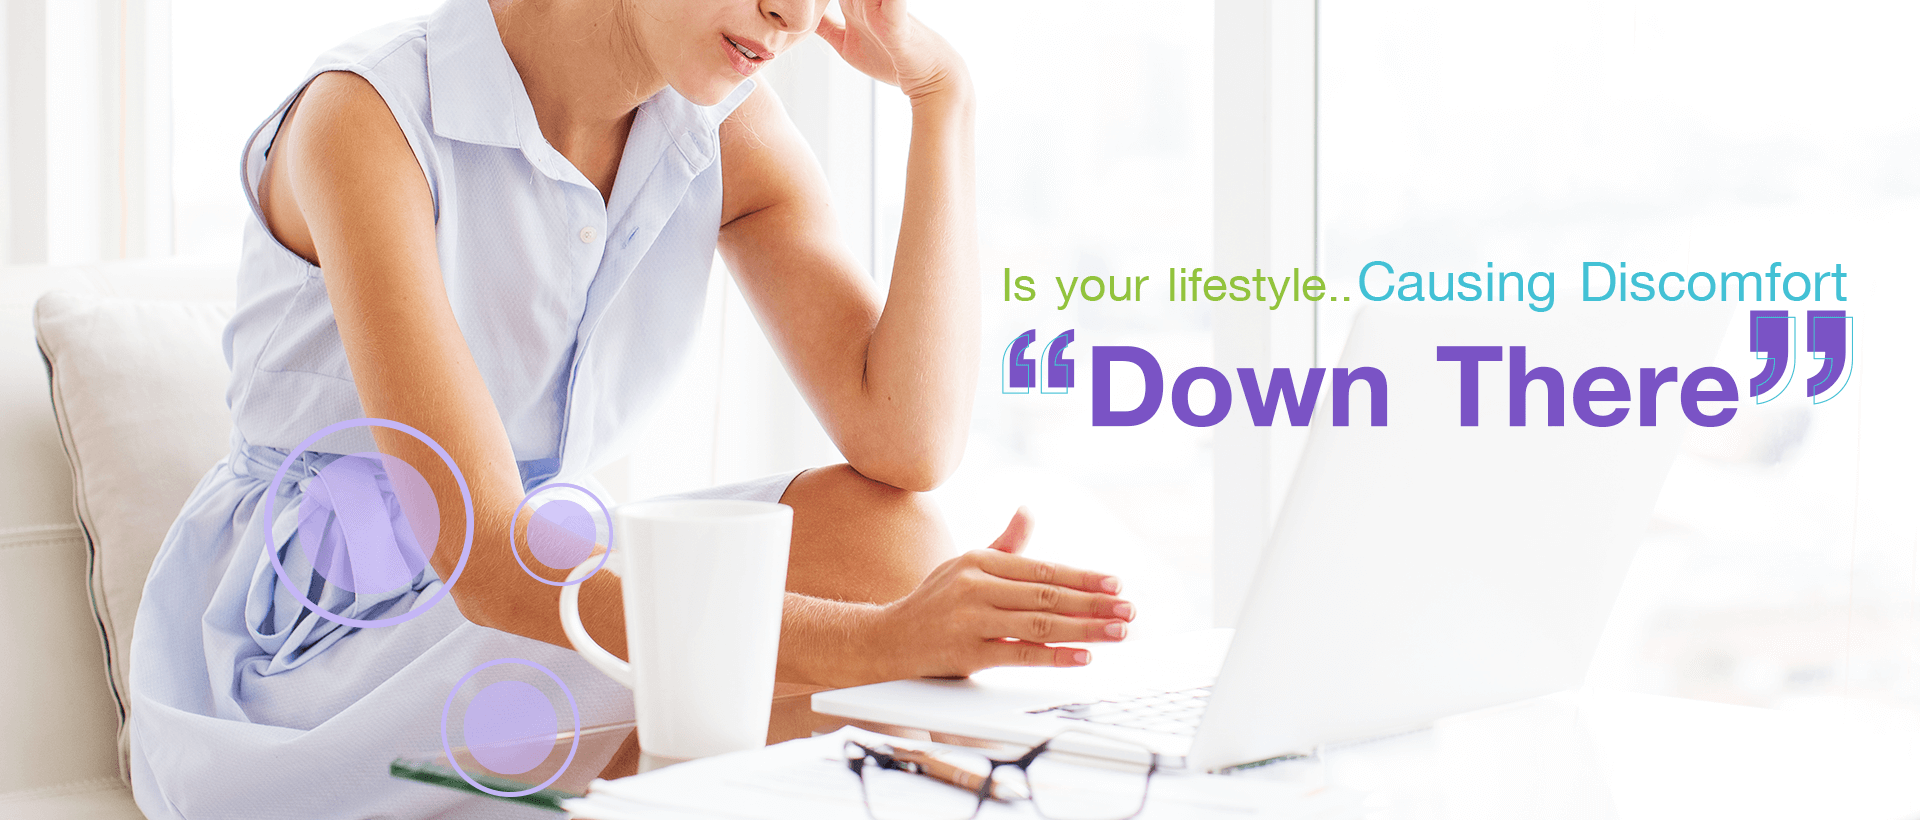 Is your lifestyle causing discomfort ‘down there’?